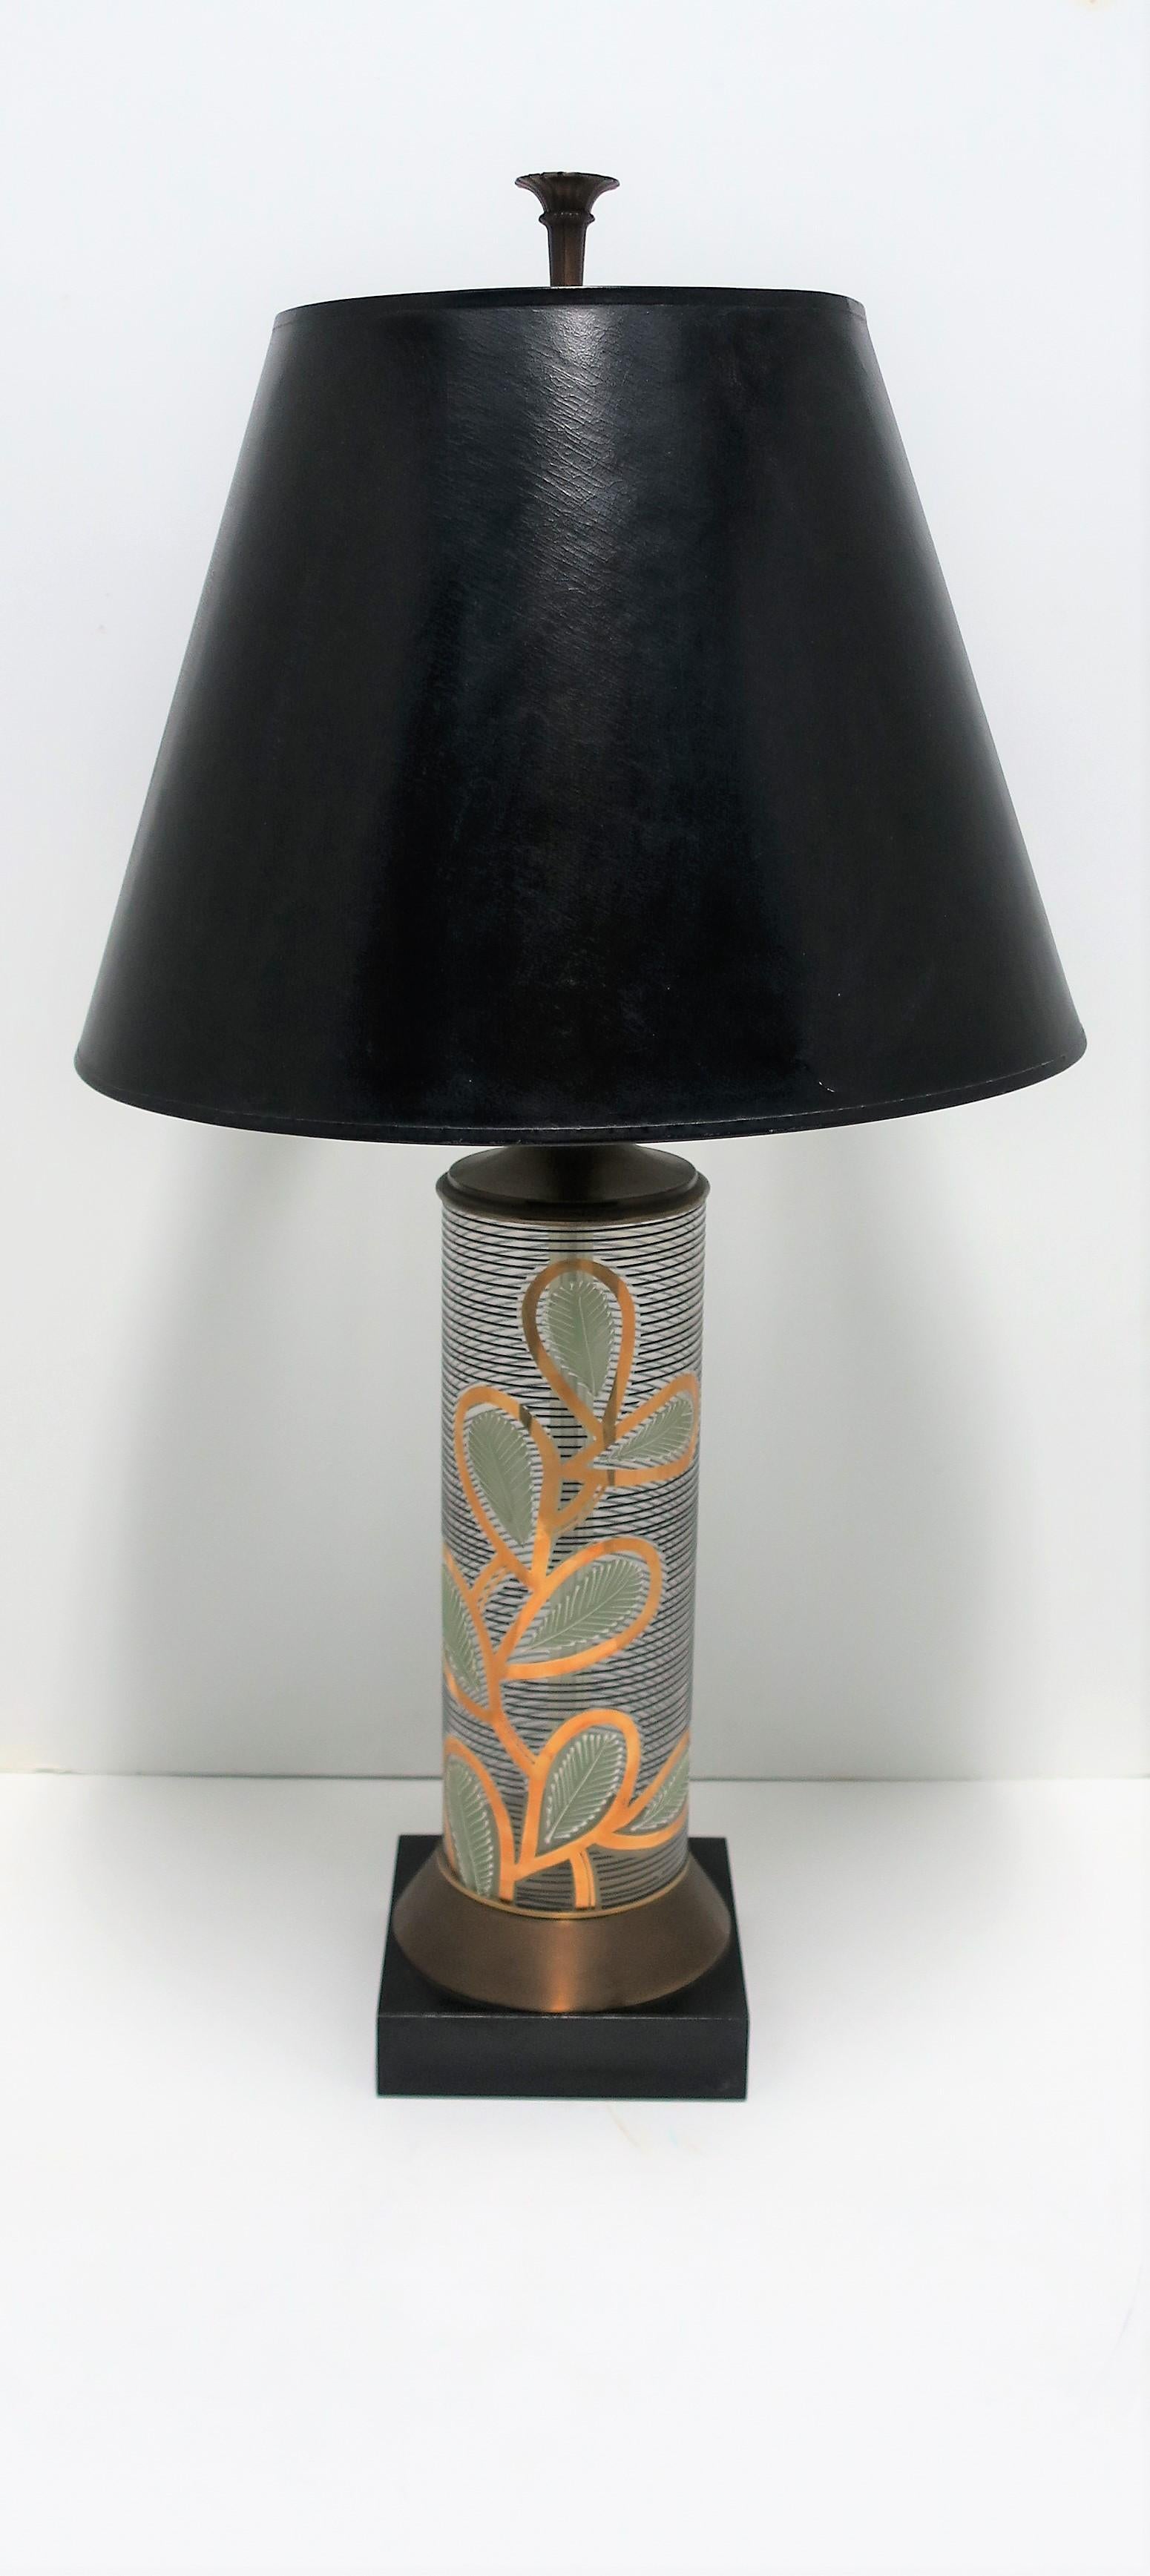 A very beautiful, tall, glass and brass table lamp with an organic modern design in black and gold, circa mid-20th century, Europe. Lamp is of the Mid-century Modern period. Lamps' design is a 'raised' relief on a cylindrical glass body; a beautiful